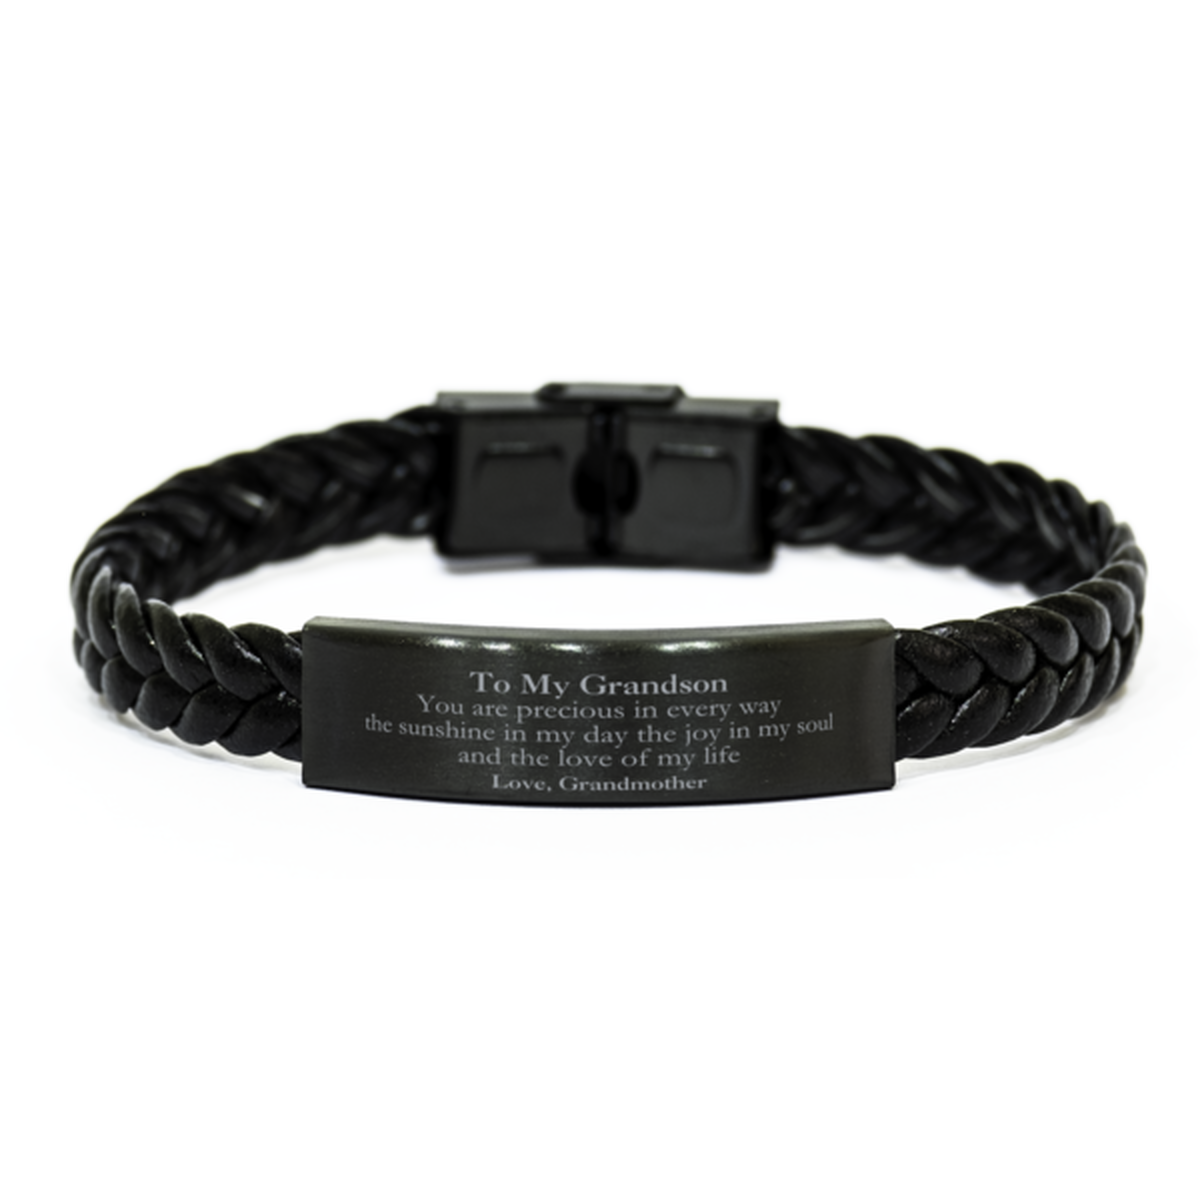 Graduation Gifts for Grandson Braided Leather Bracelet Present from Grandmother, Christmas Grandson Birthday Gifts Grandson You are precious in every way the sunshine in my day. Love, Grandmother